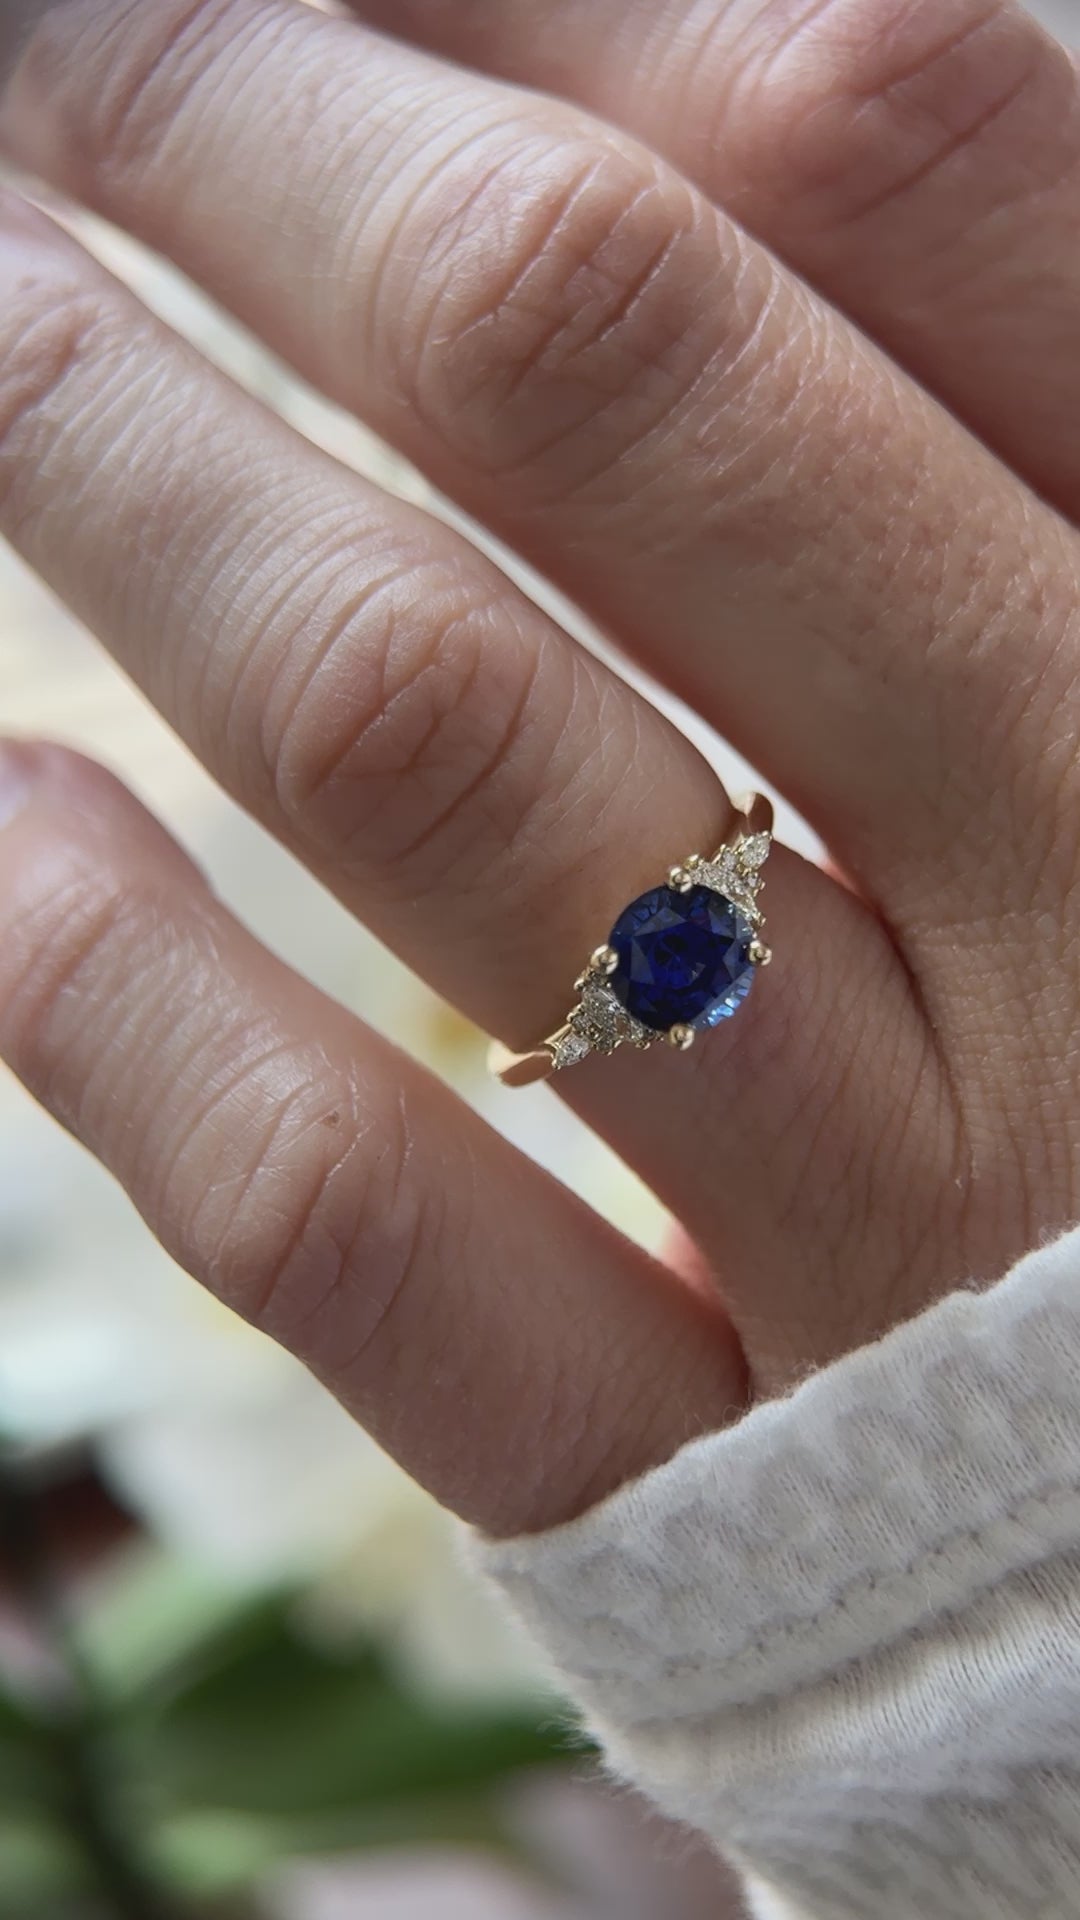 The Maeve Ring - 1.87 CT Round Royal Blue Sapphire Ring